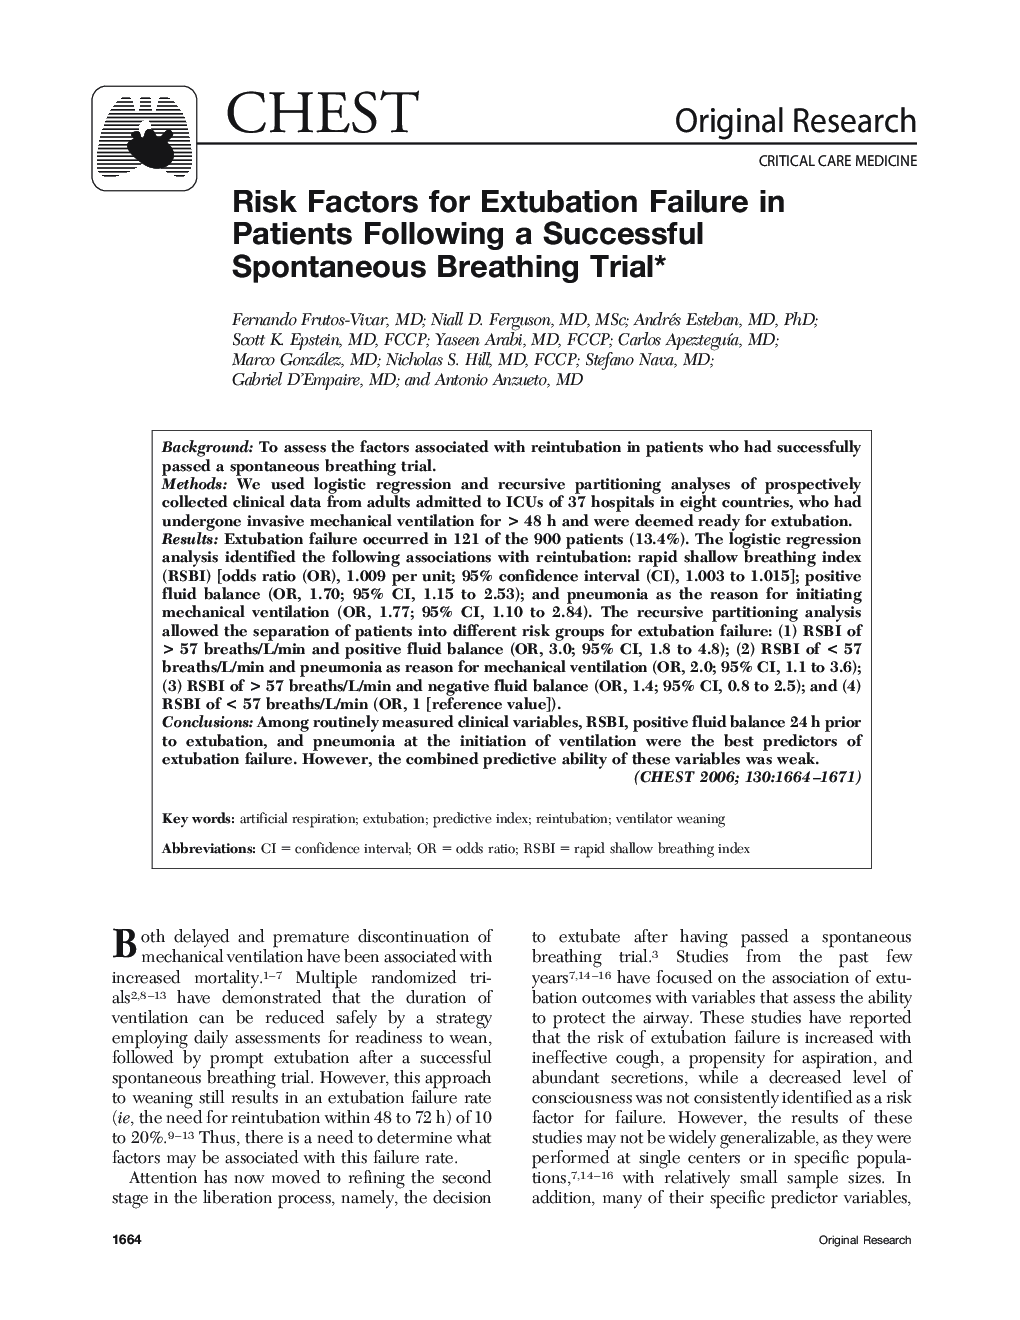 Risk Factors for Extubation Failure in Patients Following a Successful Spontaneous Breathing Trial 